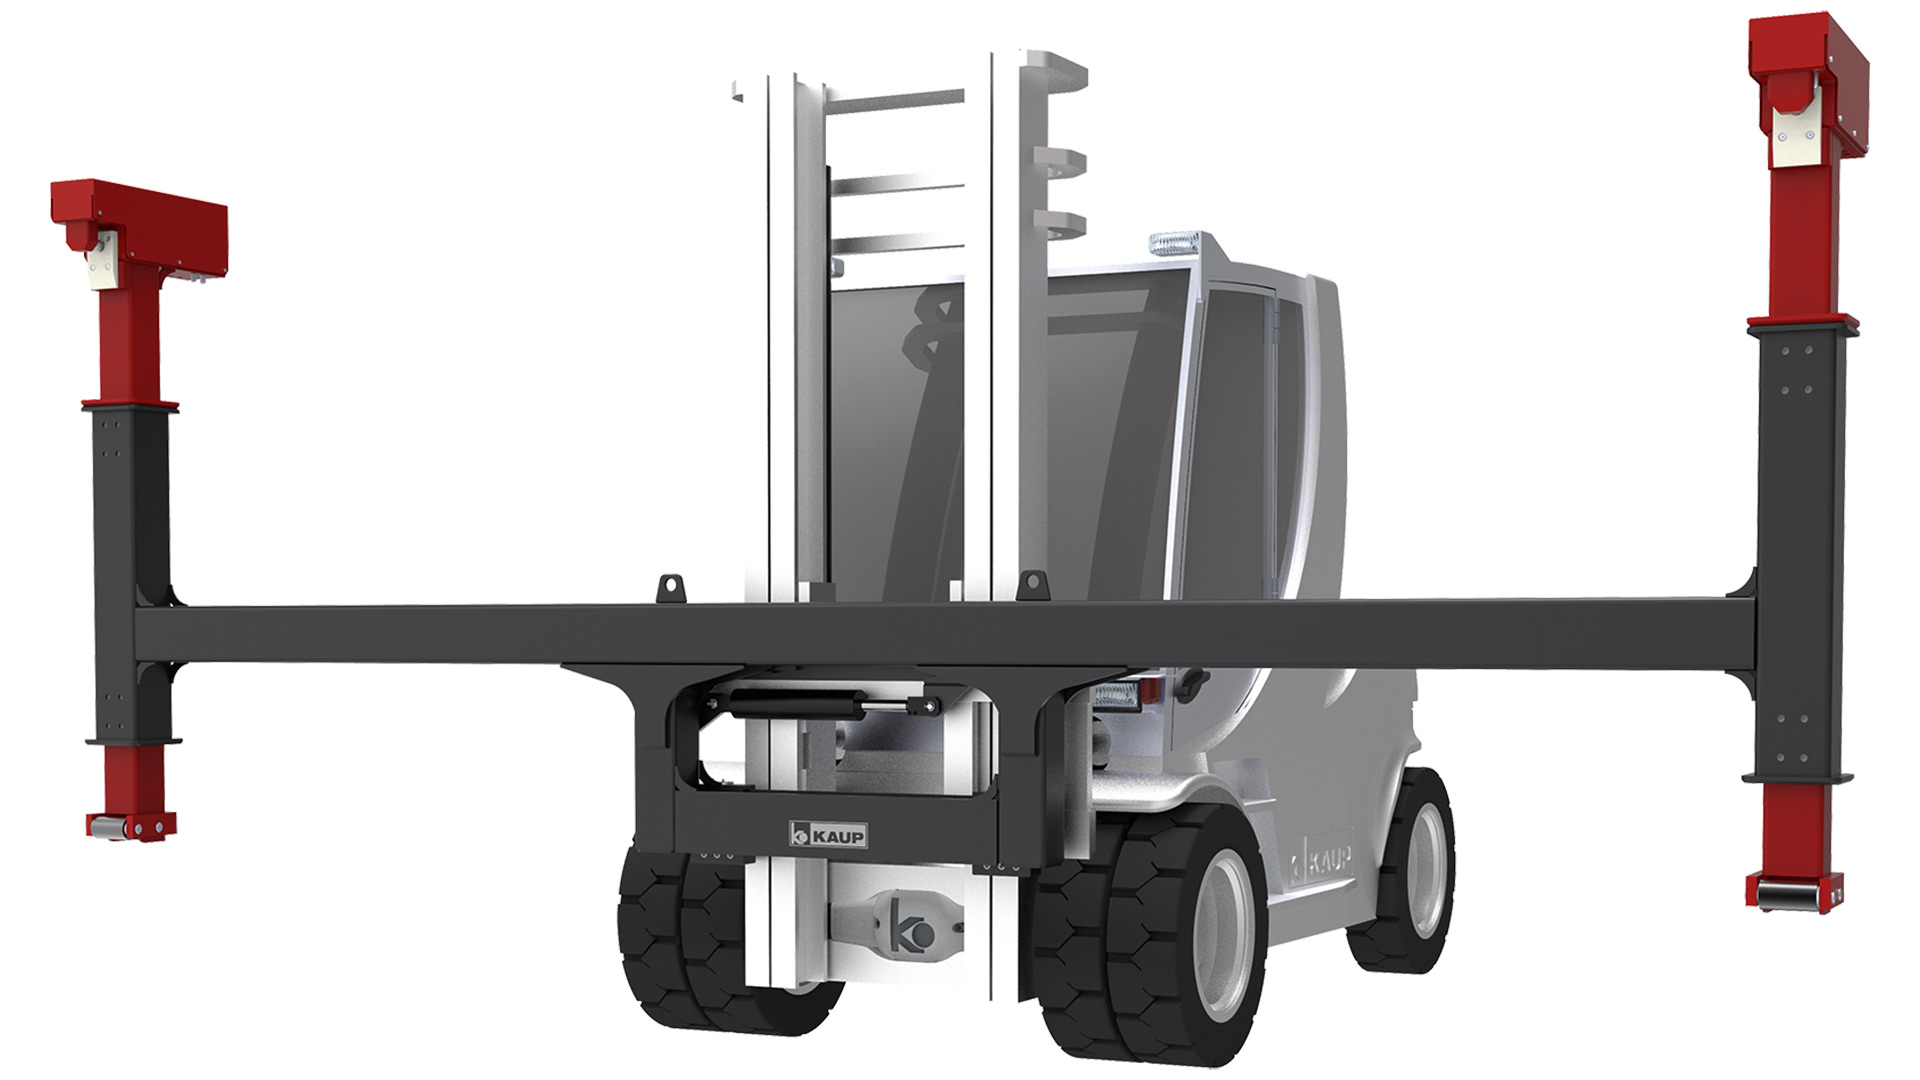 Forklift truck graphic with mounted wide spreader for containers and components highlighted in red